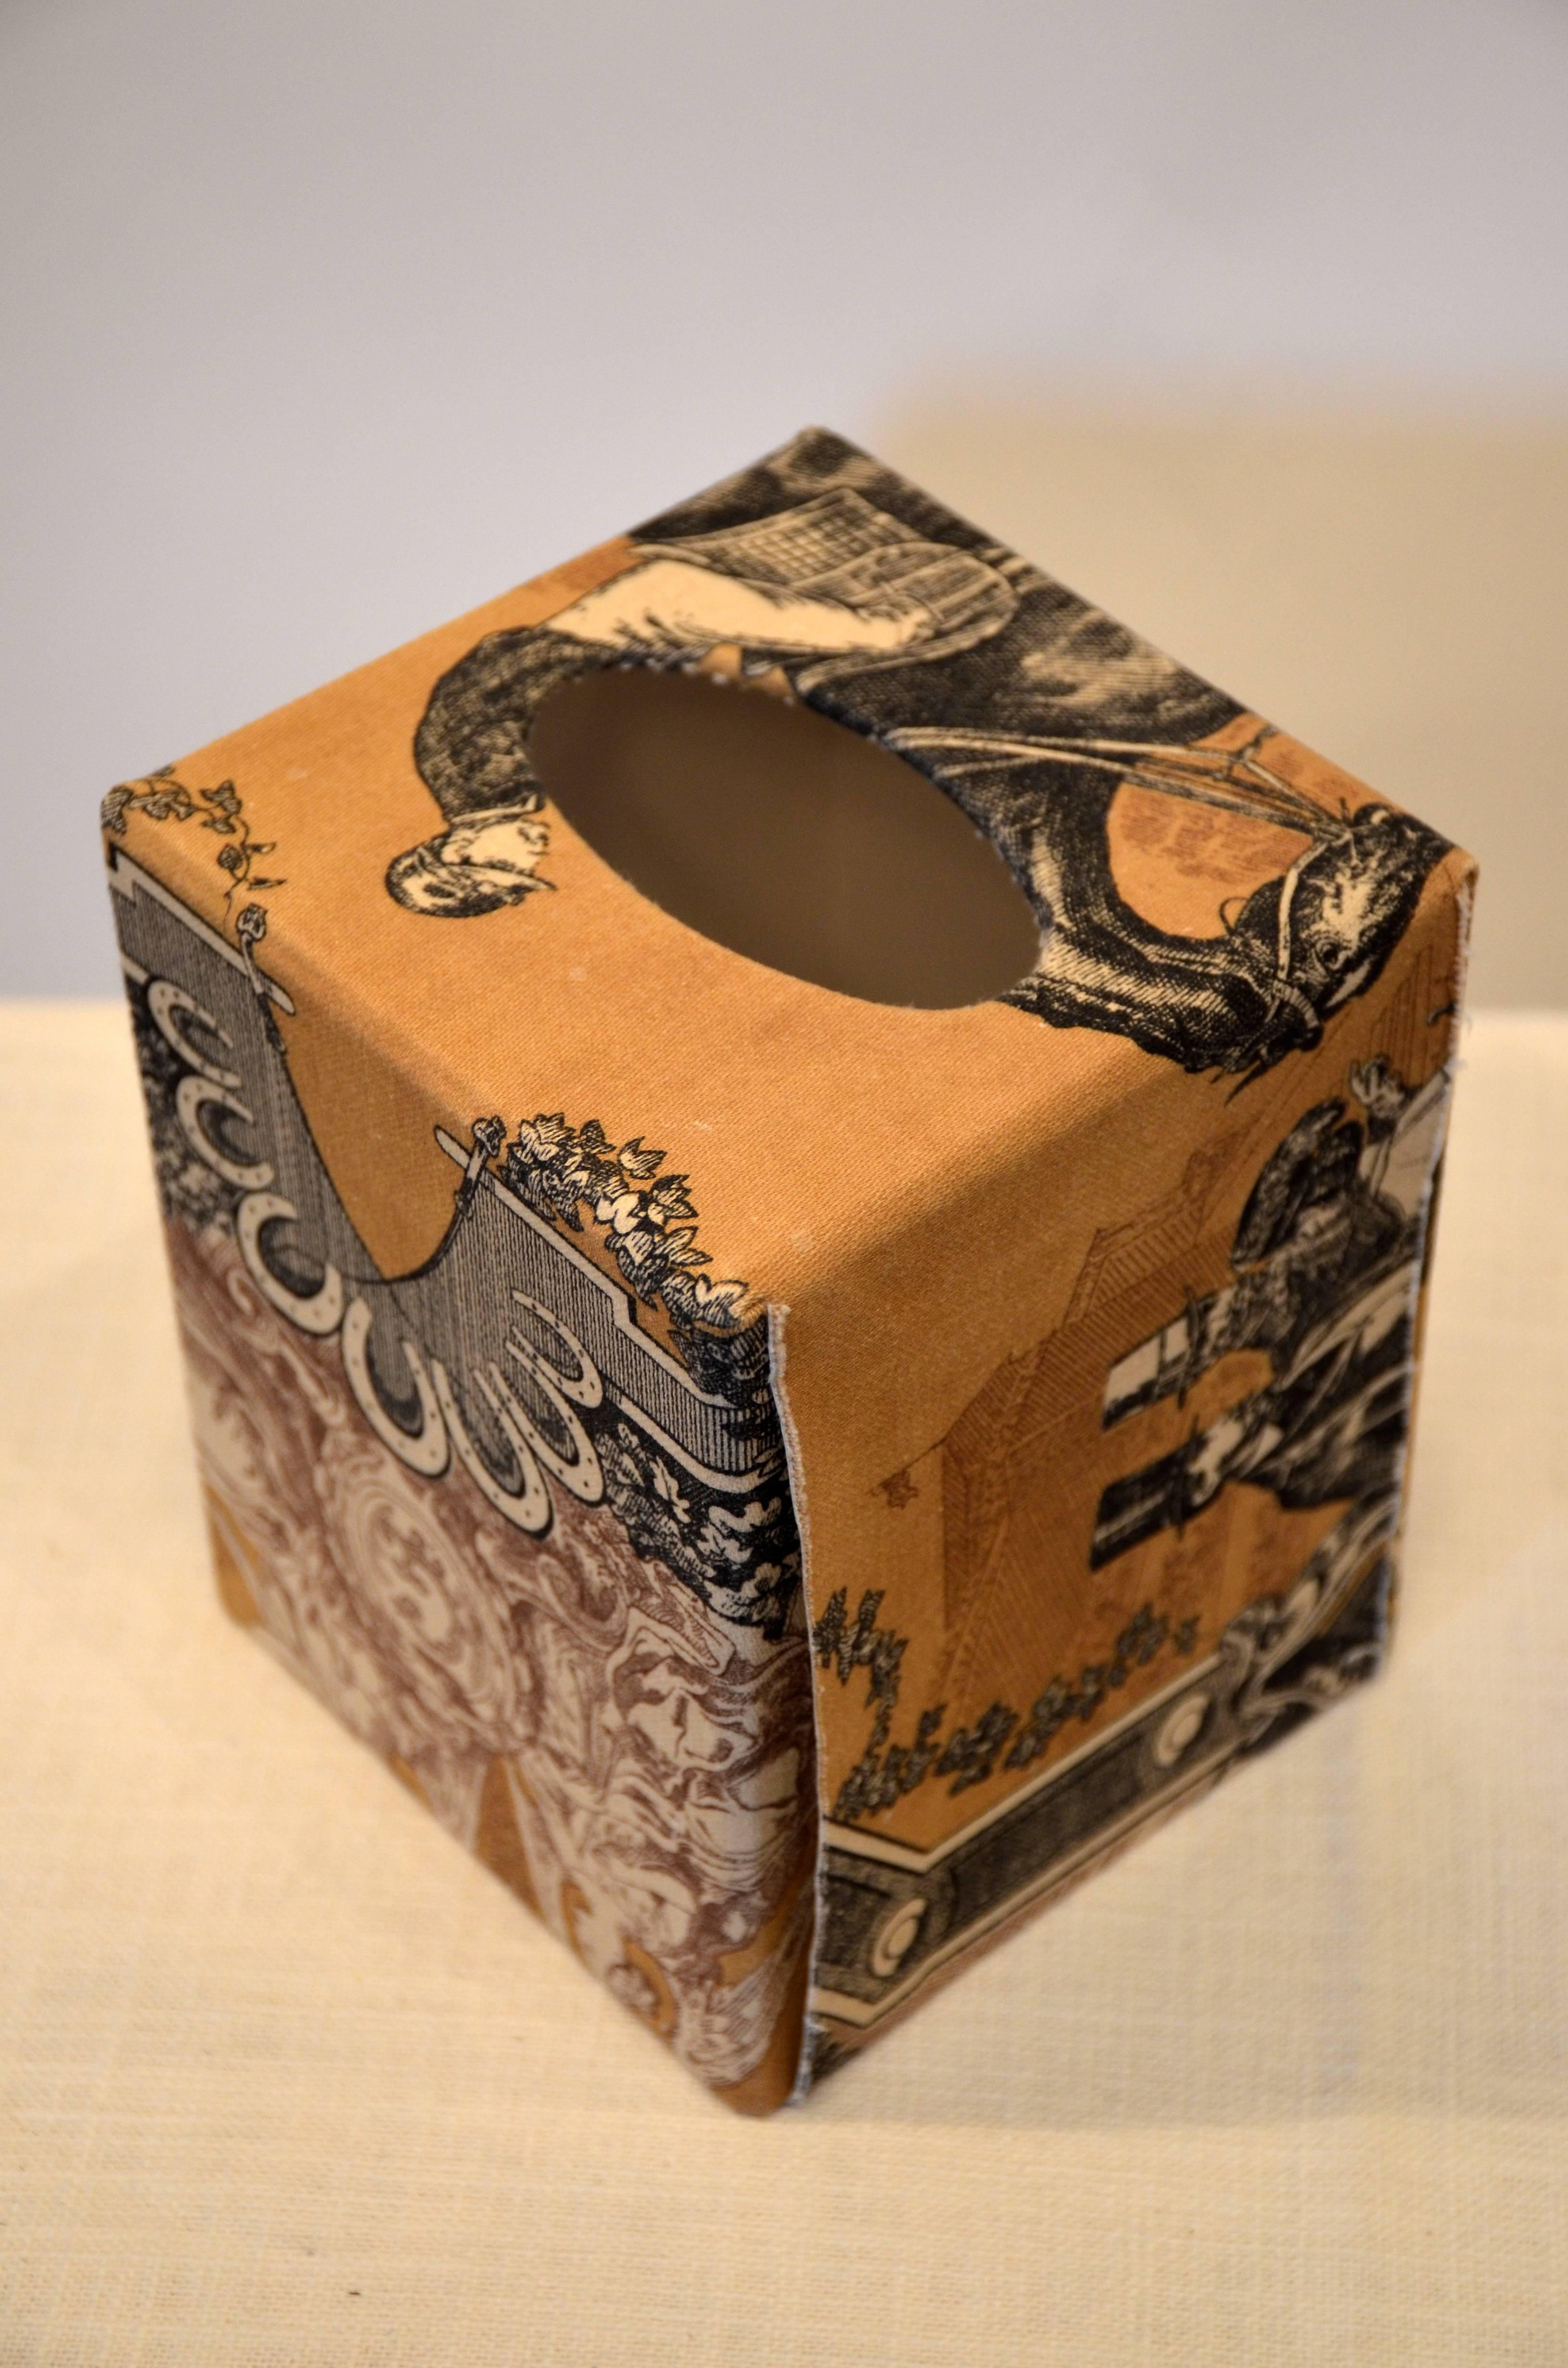 Equestrian Tissue Box Cover In Good Condition For Sale In Southampton, NY